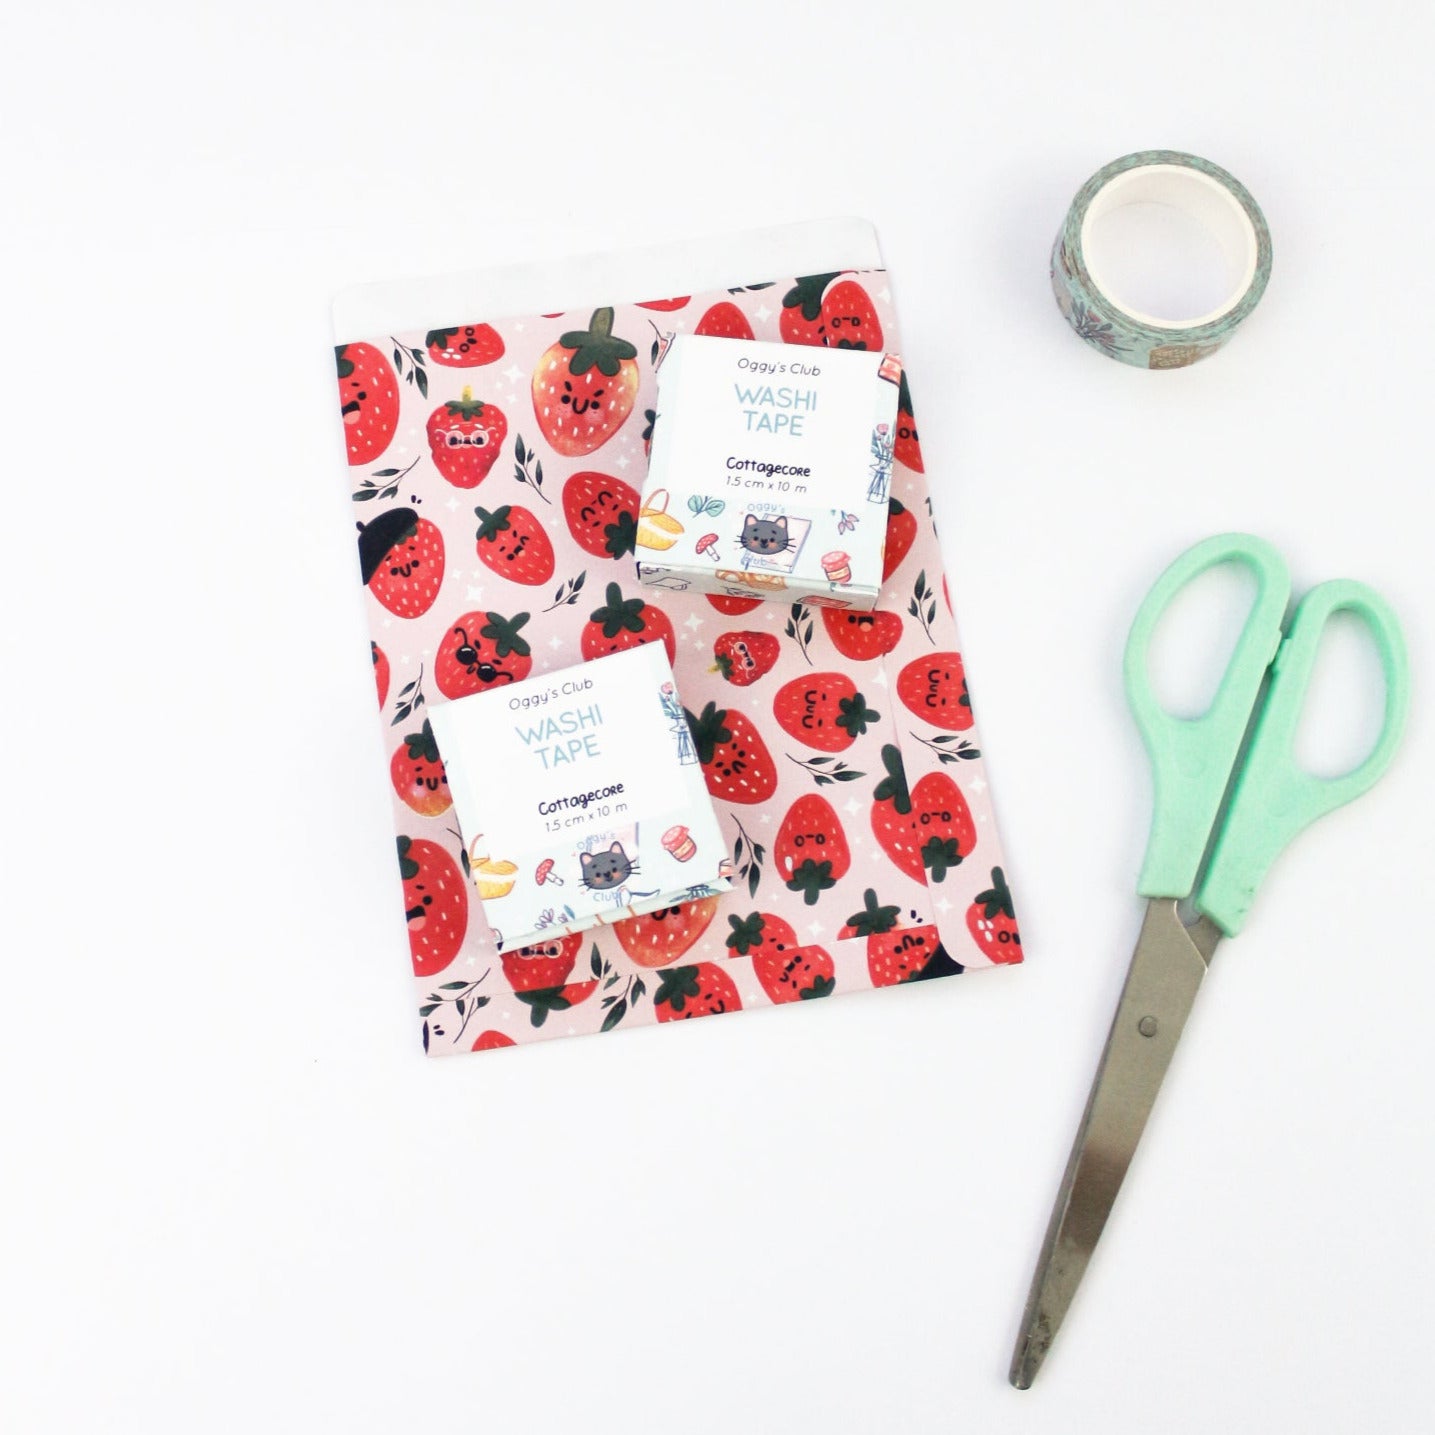 Strawberries gift bags - Birthday gift wrapping